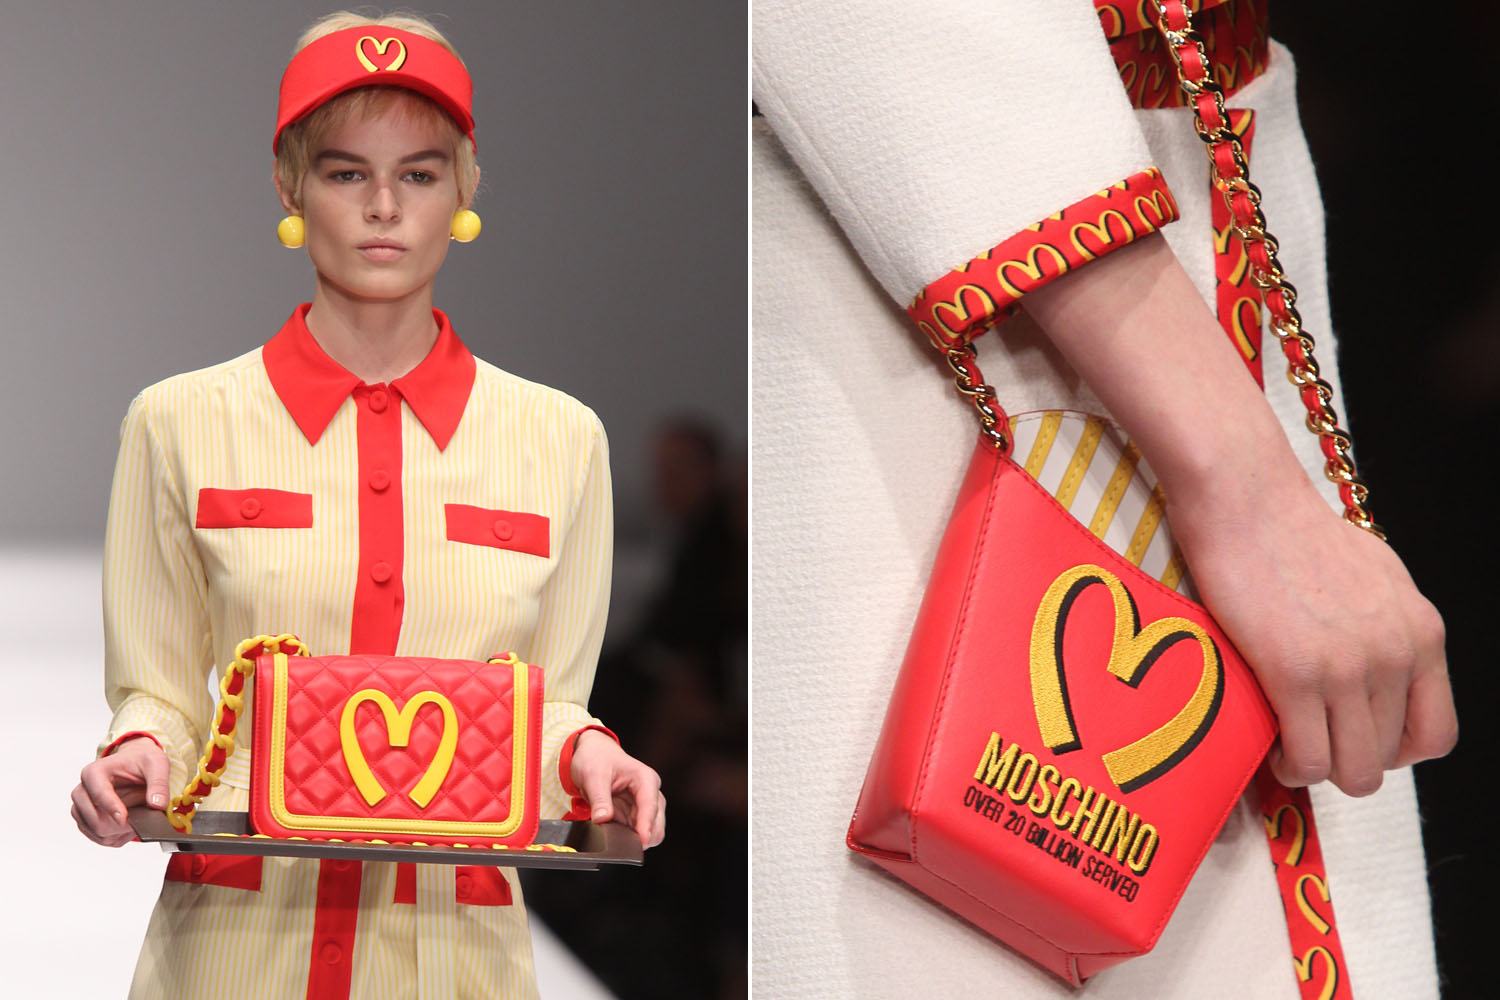 What Fast Food Item Are You? fast food inspired fashion